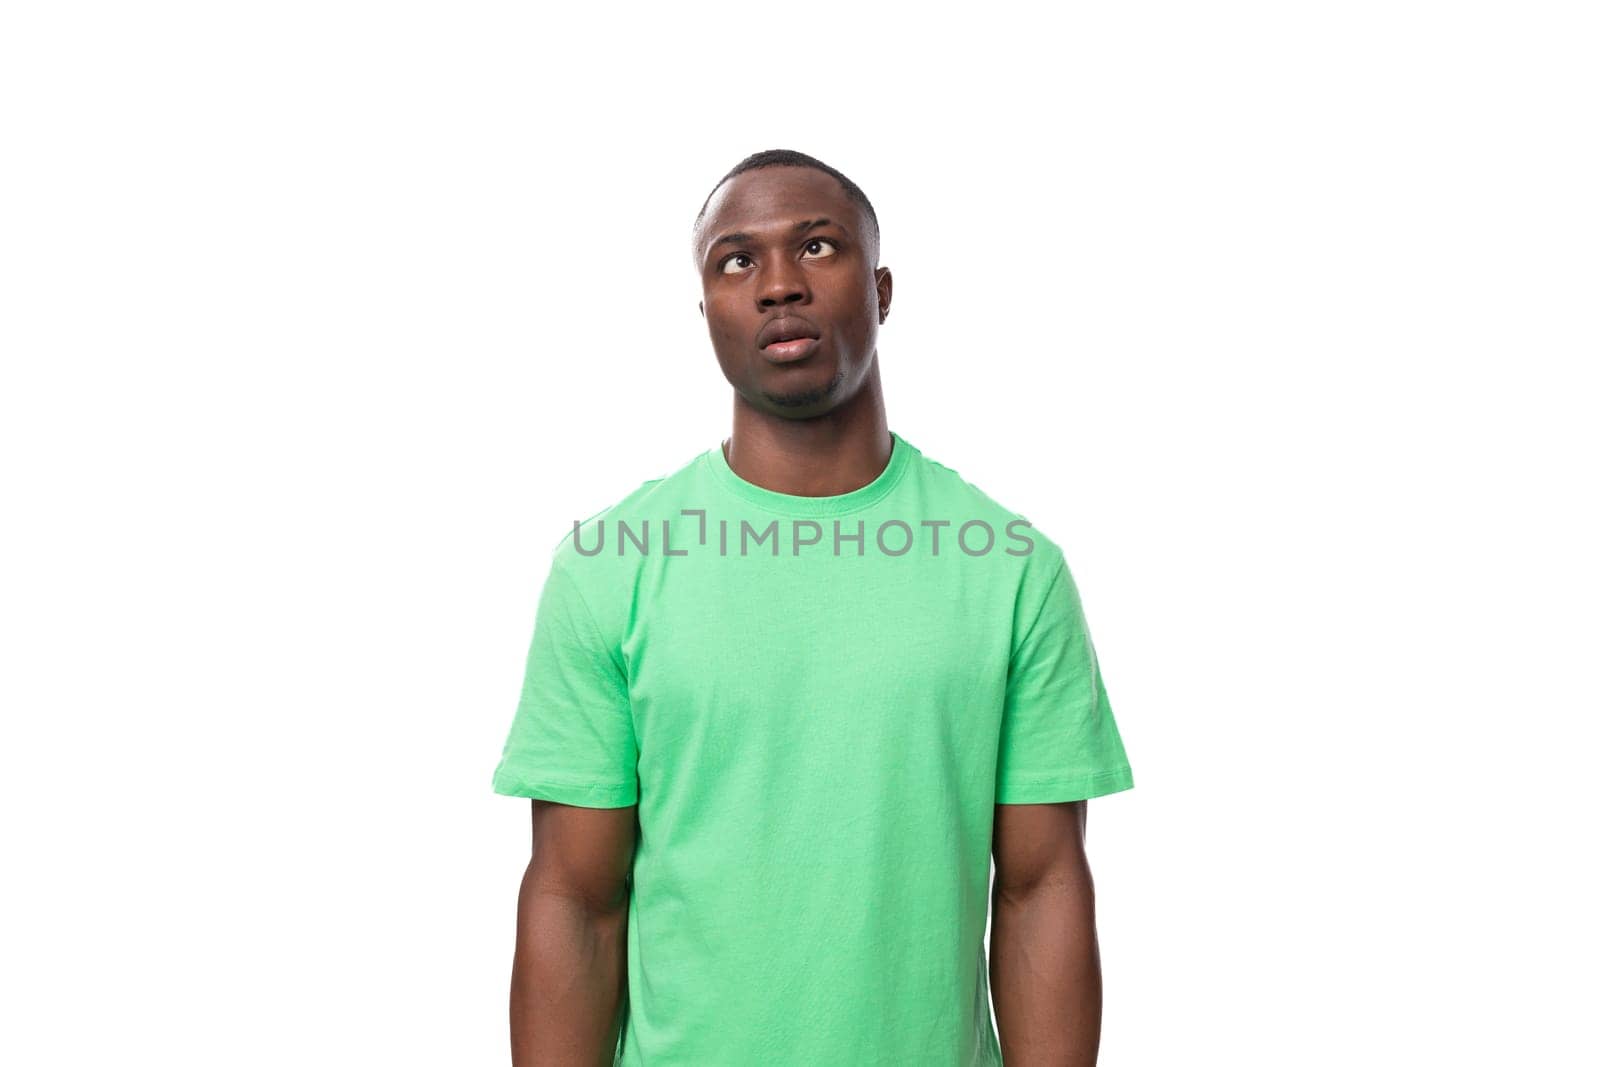 A 30-year-old smart African man dressed in a light green T-shirt is trying to remember a thought.